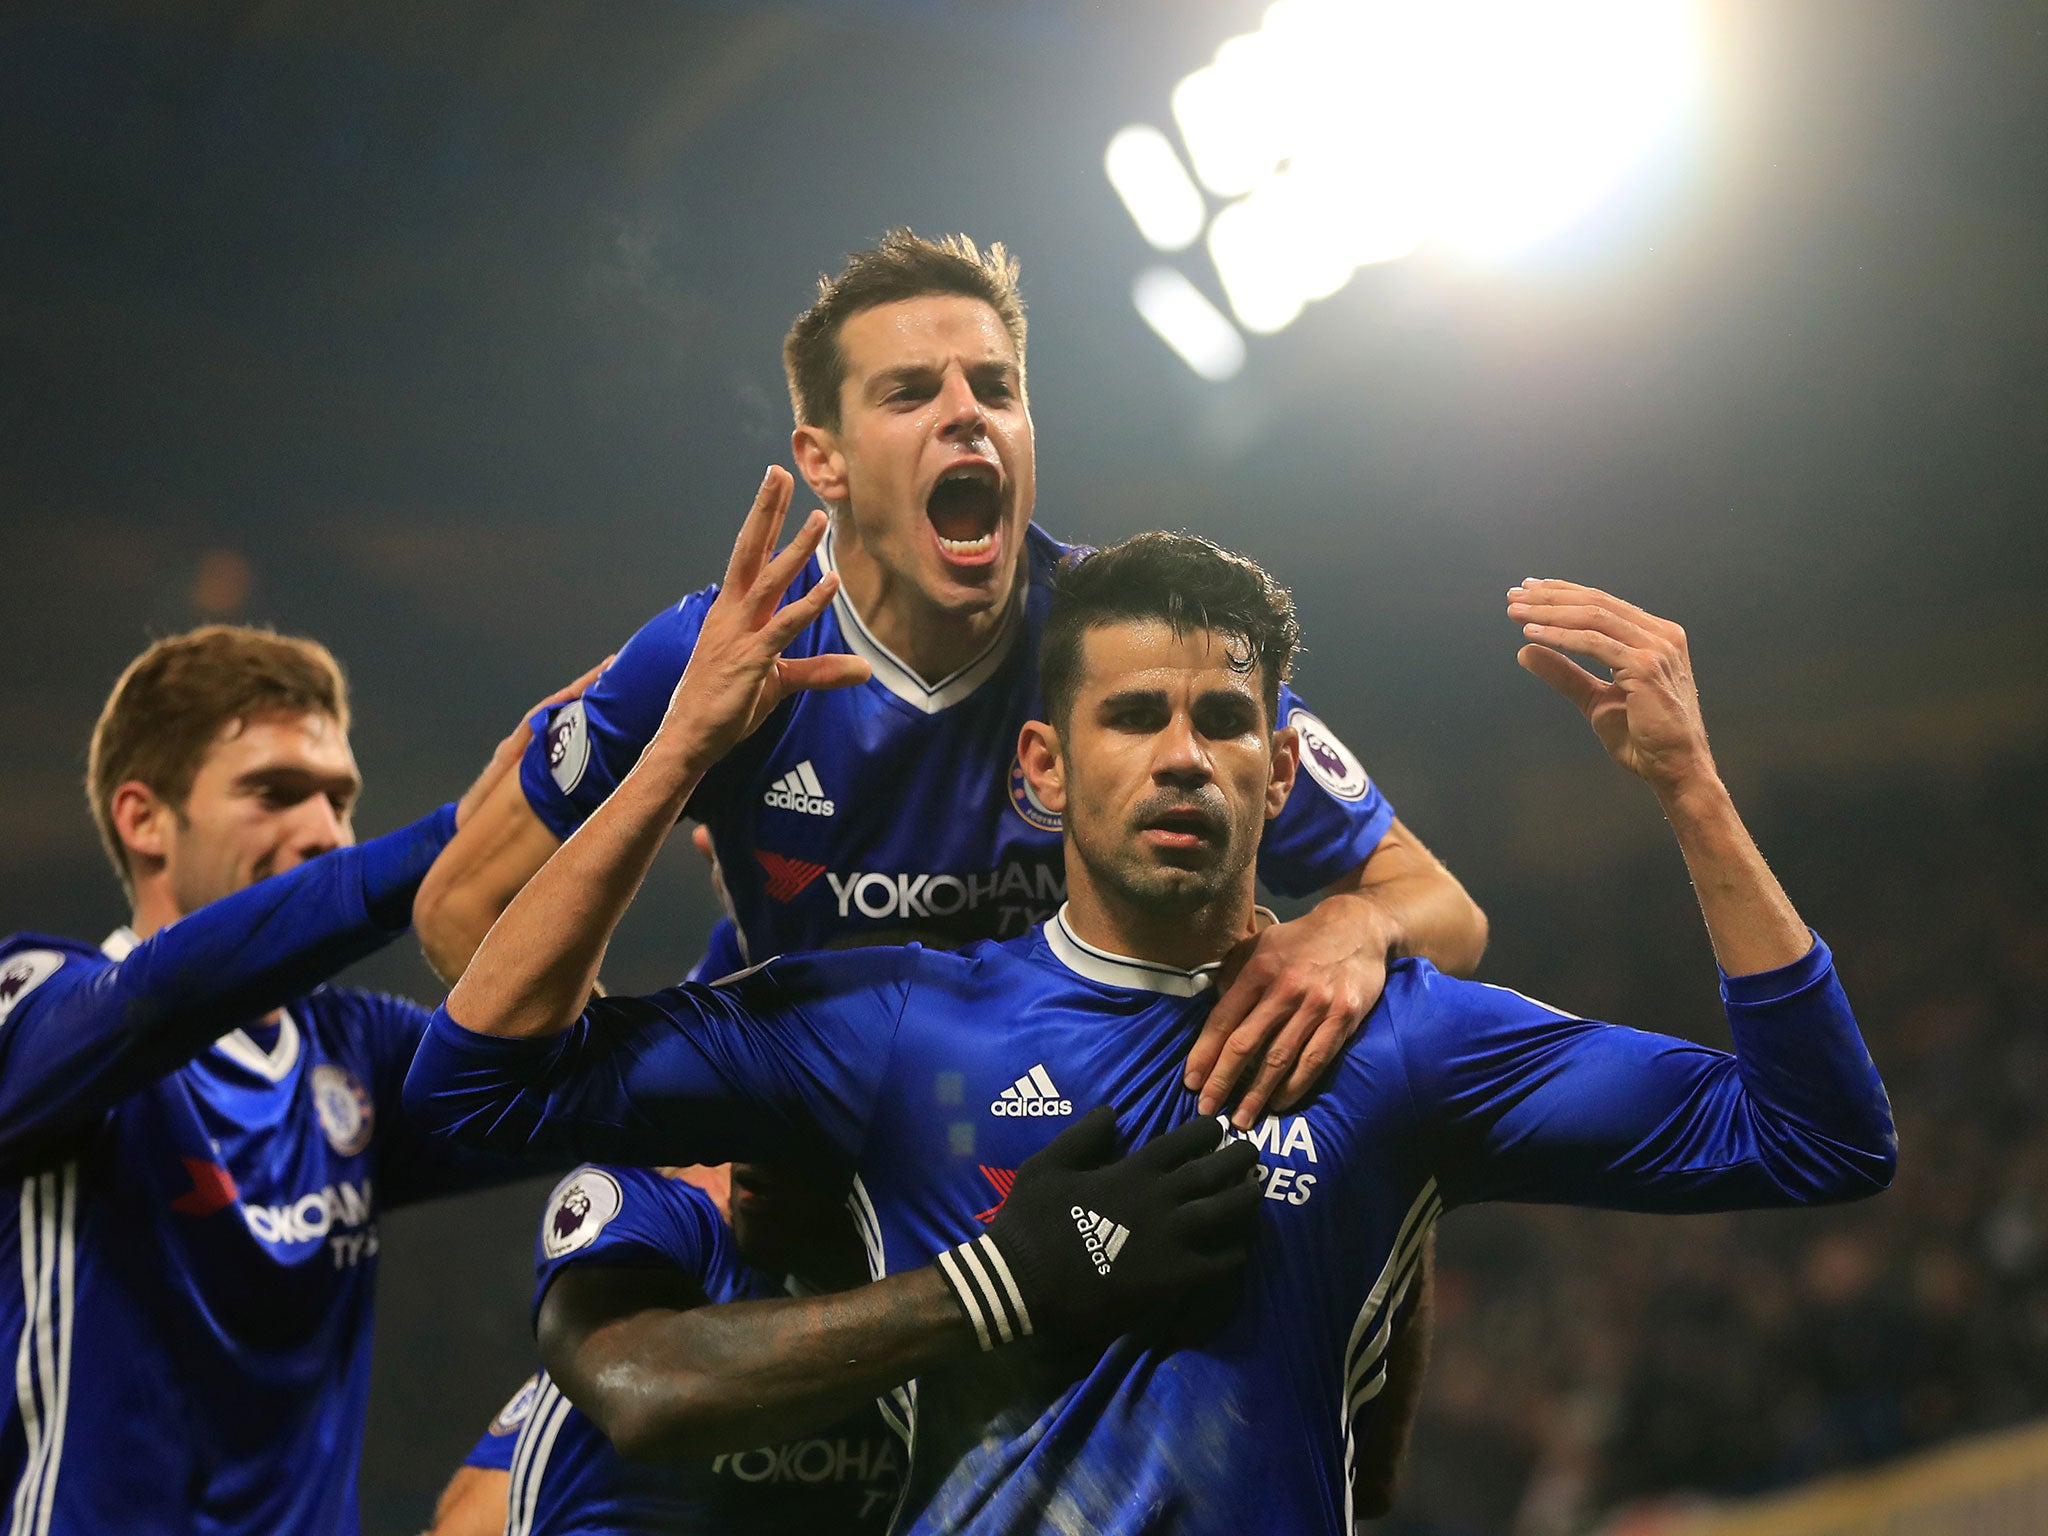 Chelsea's balance of attack and defence has turned the side into a football juggernaut